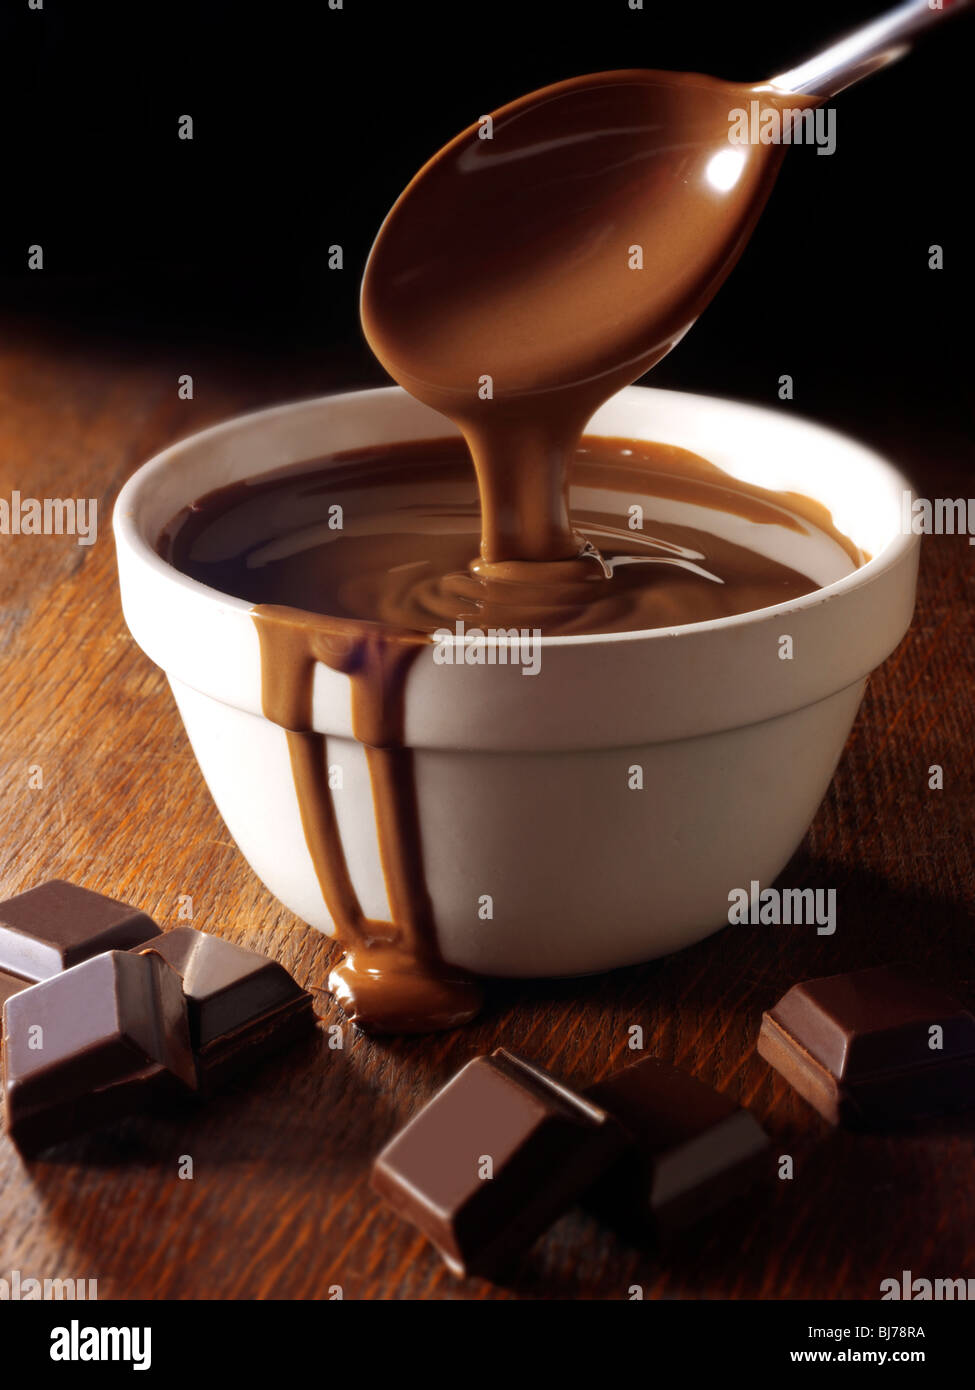 Melted Choclate being stirred in a bowl - Stock Photos. Stock Photo